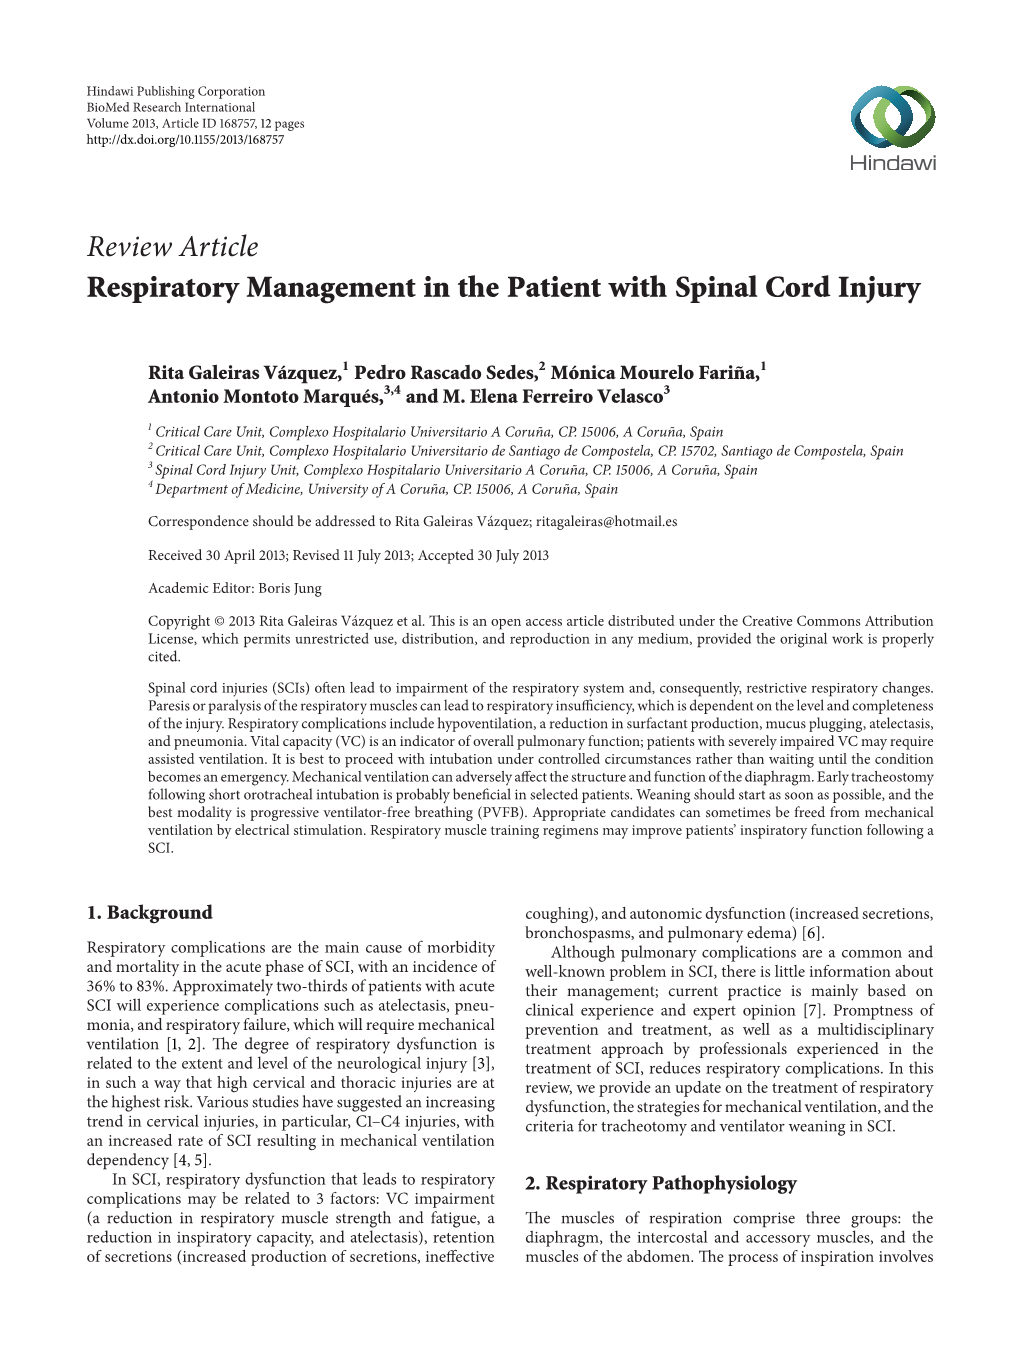 Respiratory Management in the Patient with Spinal Cord Injury